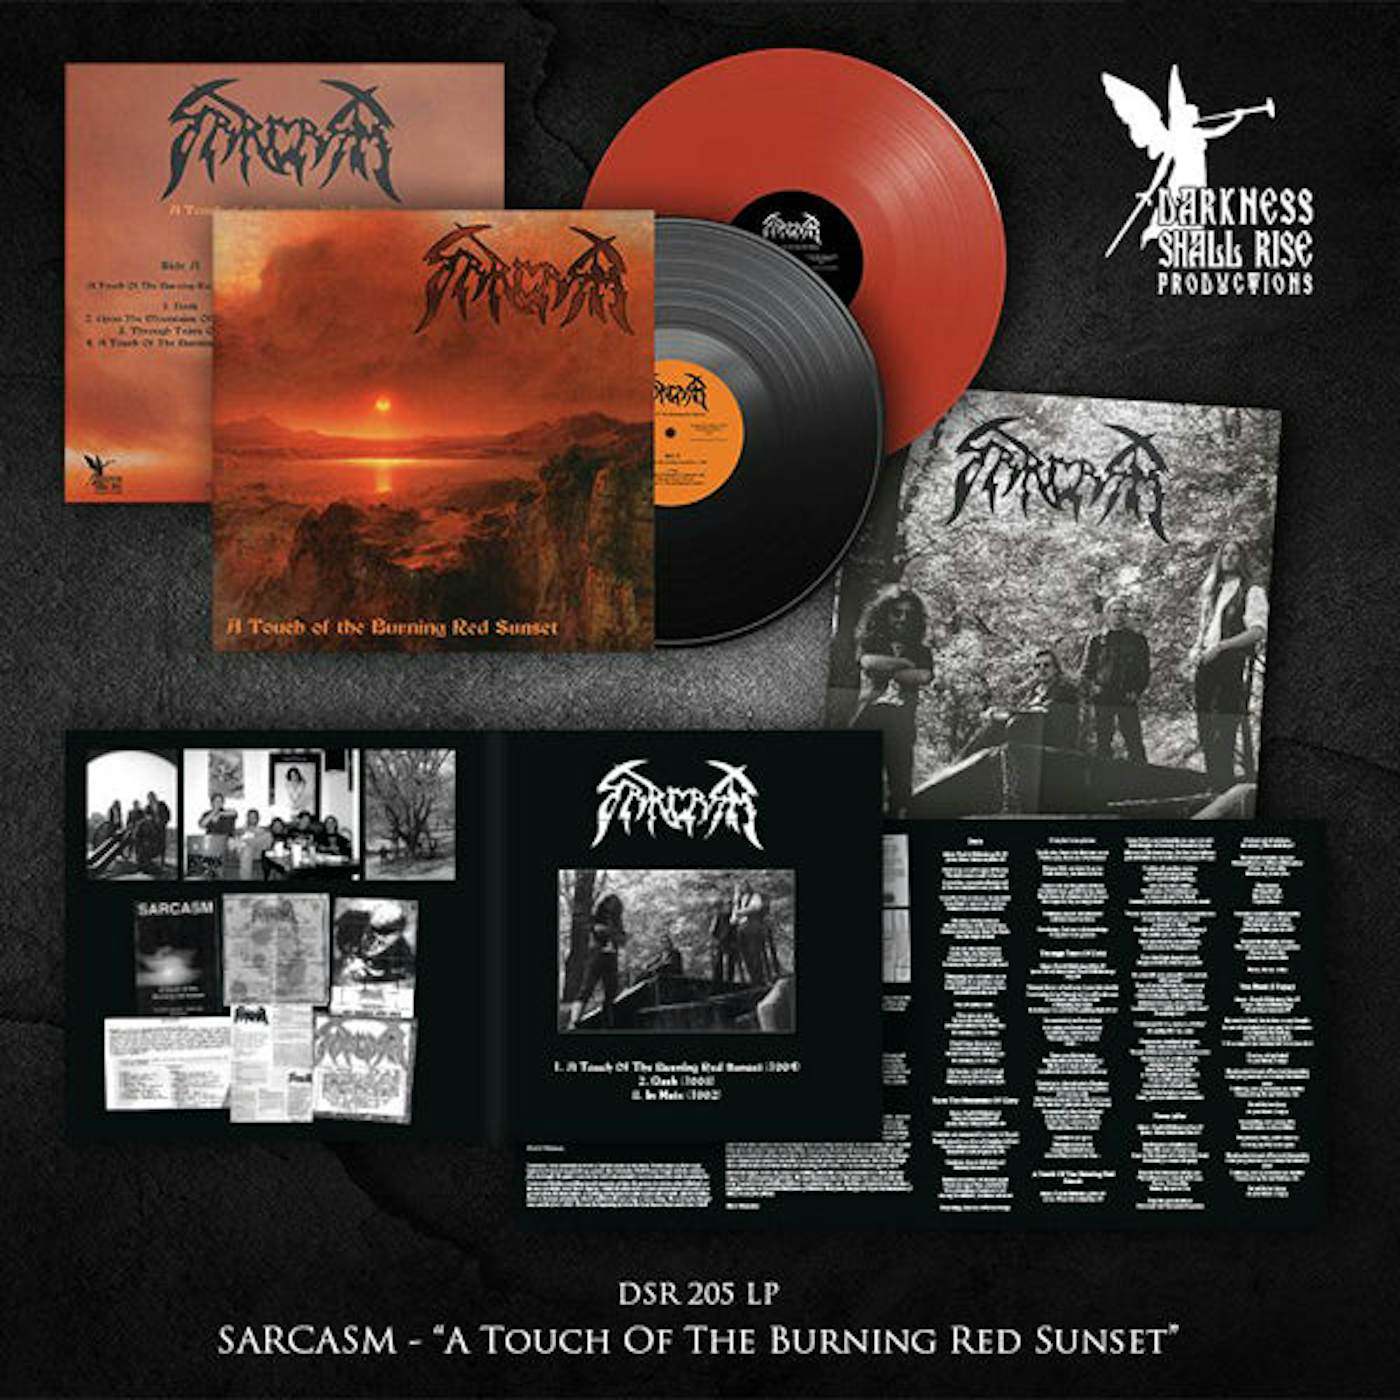  Sarcasm LP - A Touch Of The Burning Red Sunset (Black Vinyl)